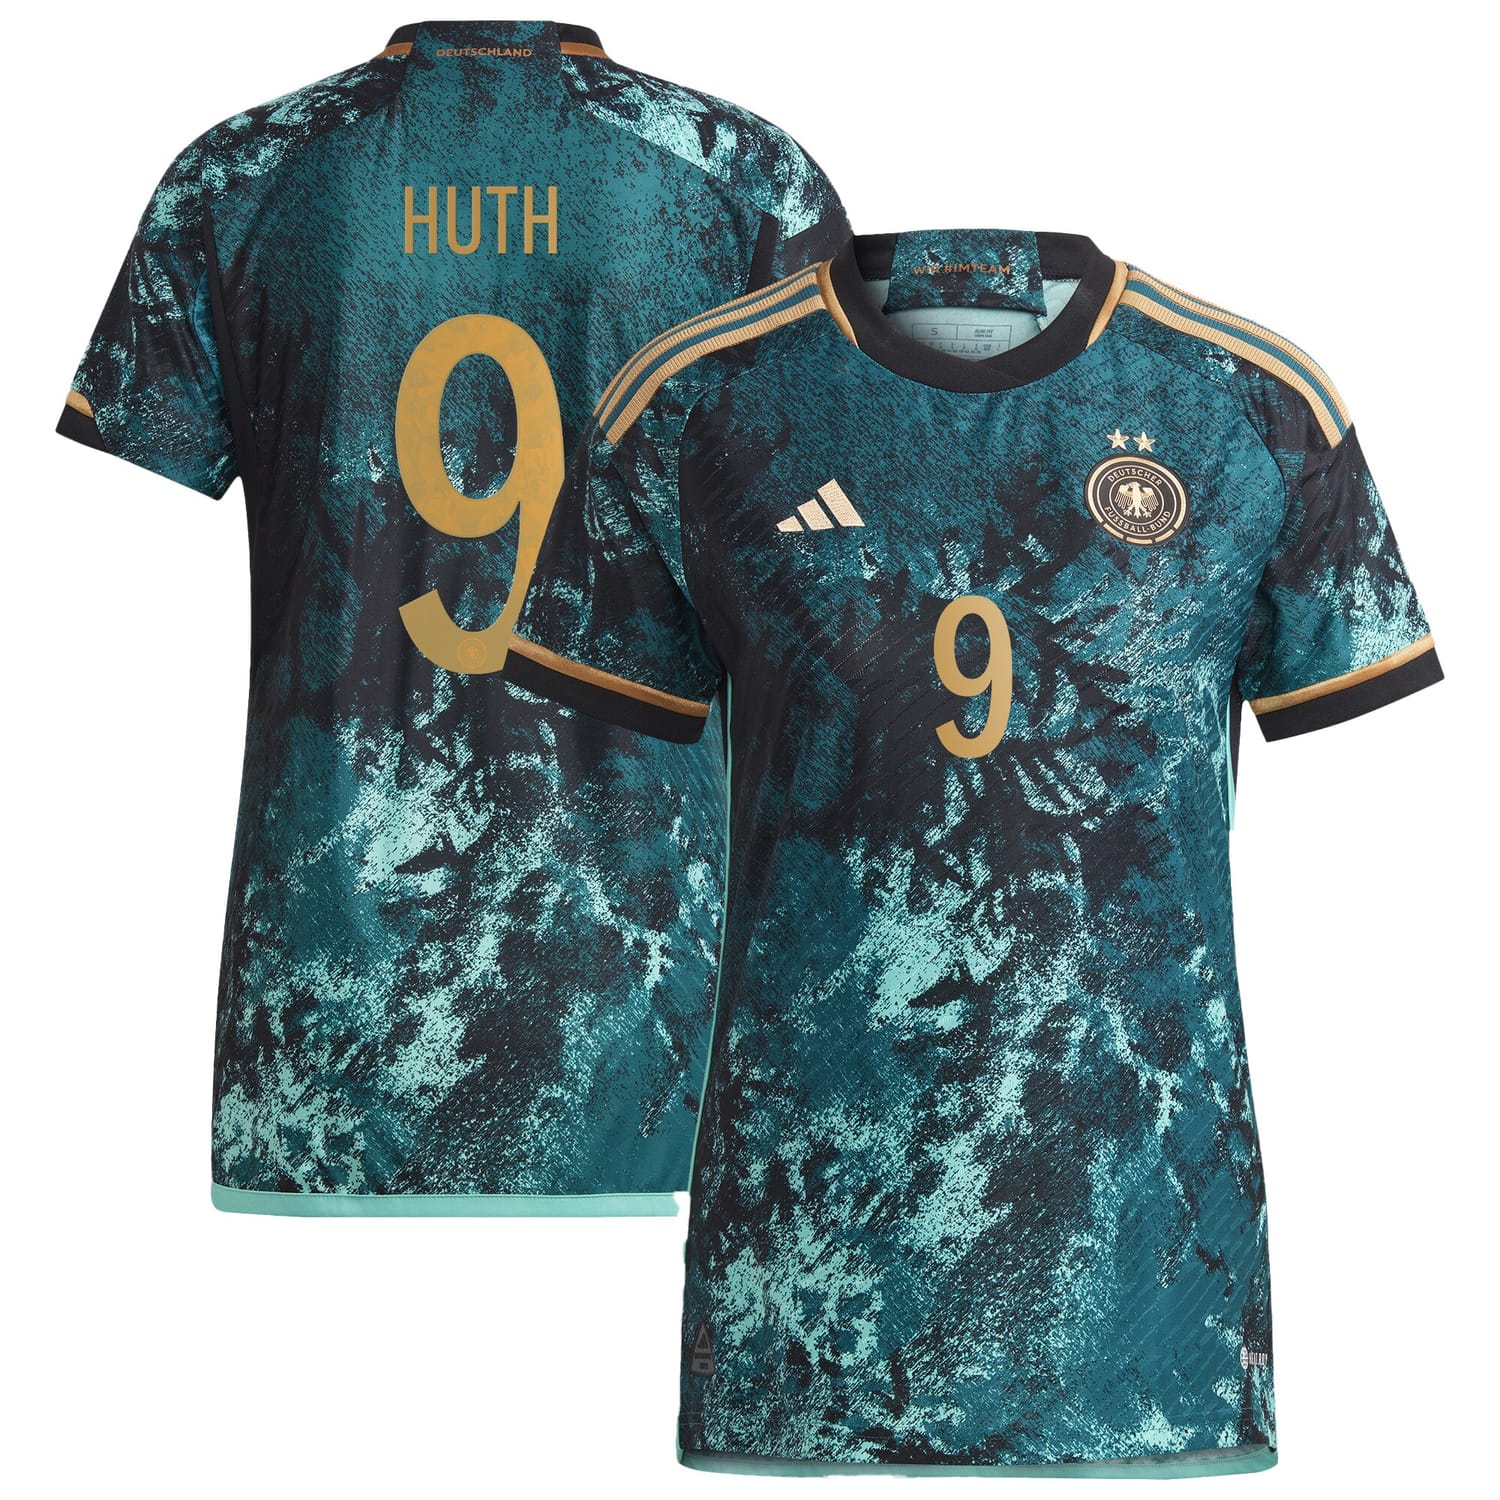 Germany National Team Away Authentic Jersey Shirt 2023 player Svenja Huth 9 printing for Women